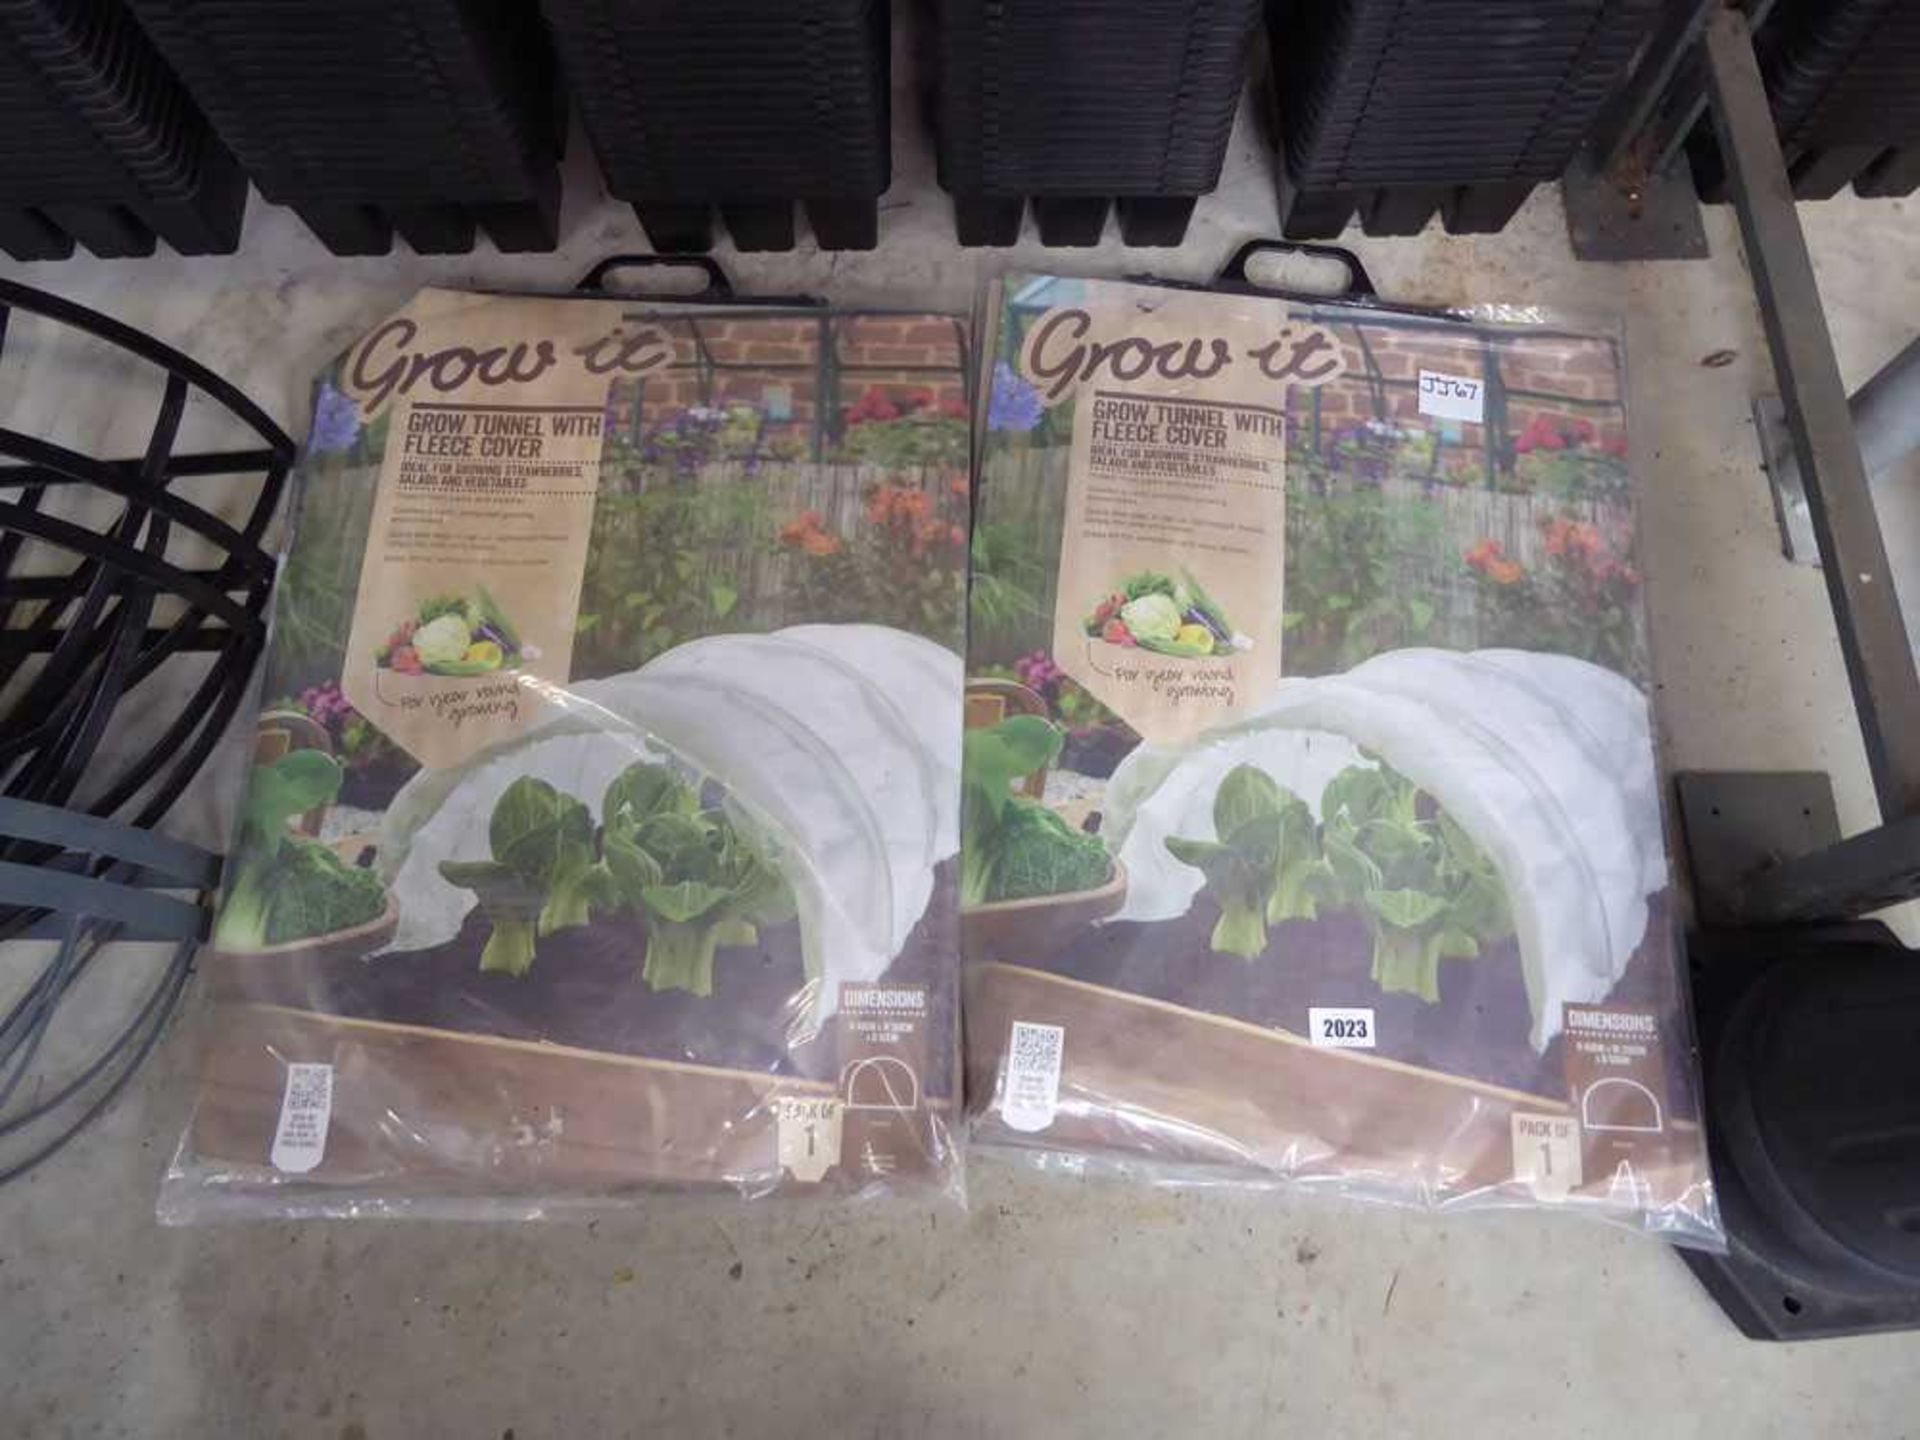 Pair of Grow Tunnels with fleece covers (310 x 50 x 40cm.)